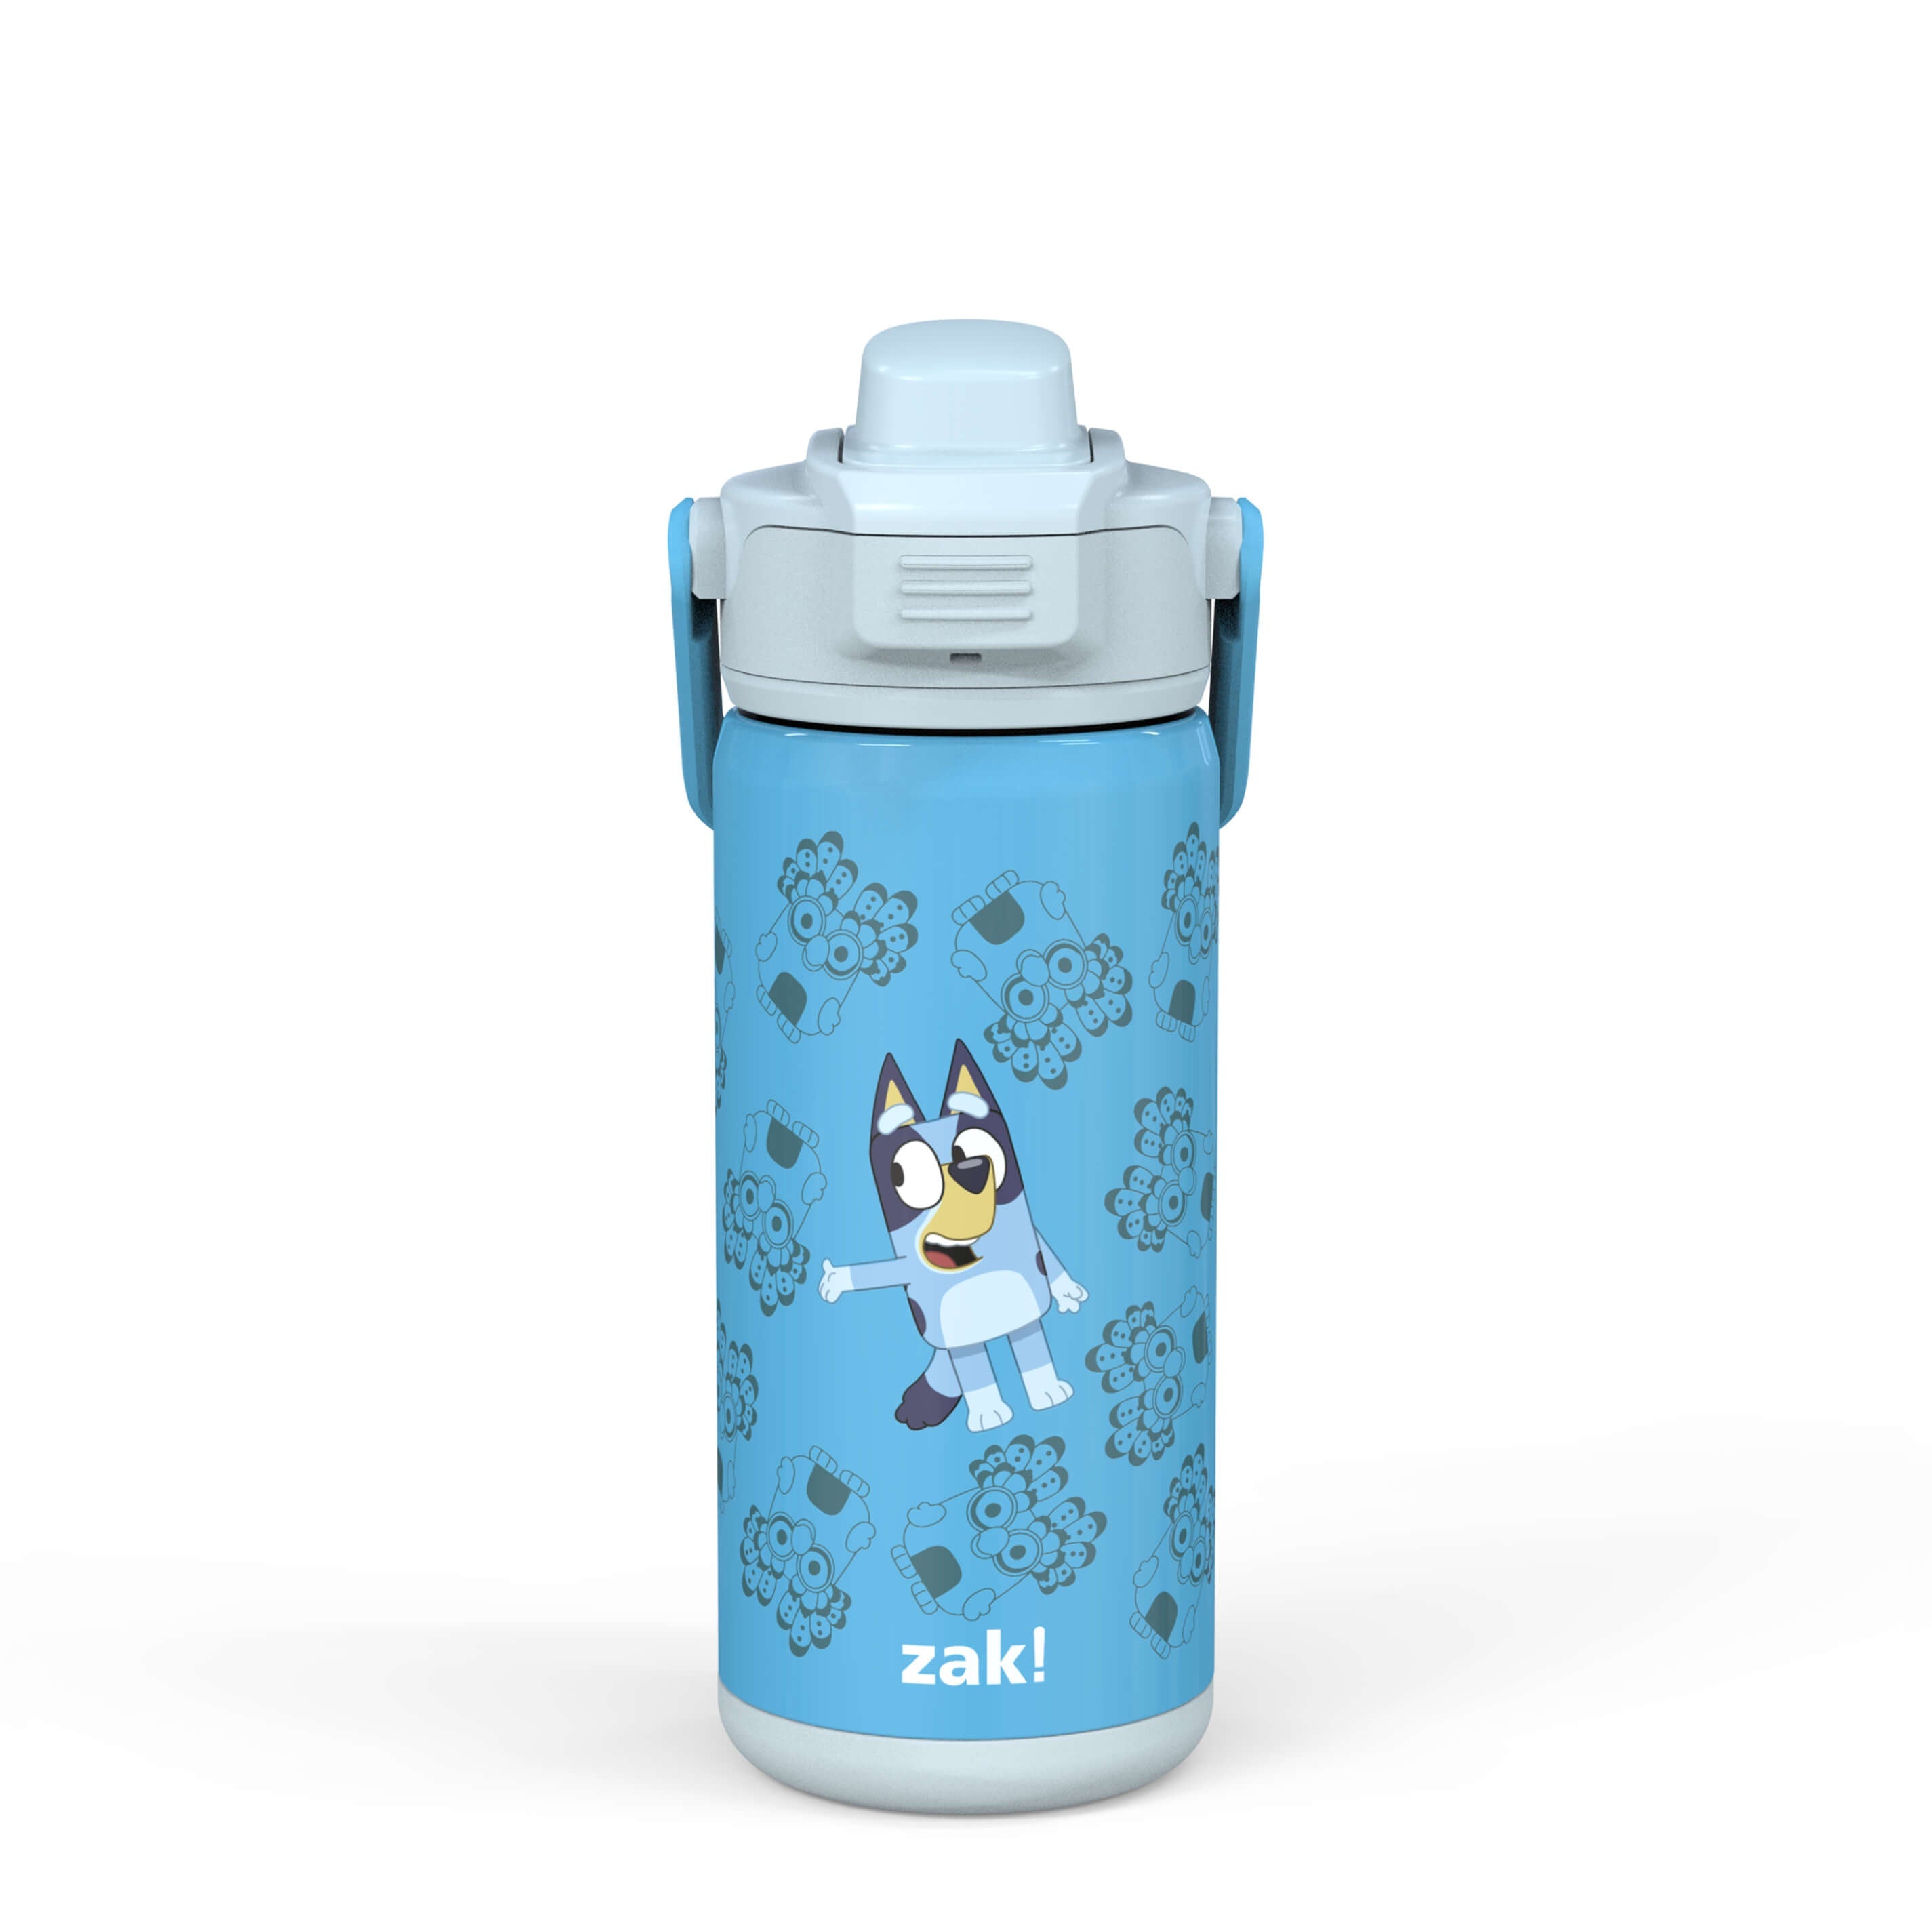 Bluey Beacon Stainless Steel Insulated Kids Water Bottle with Covered Spout, 14 Ounces